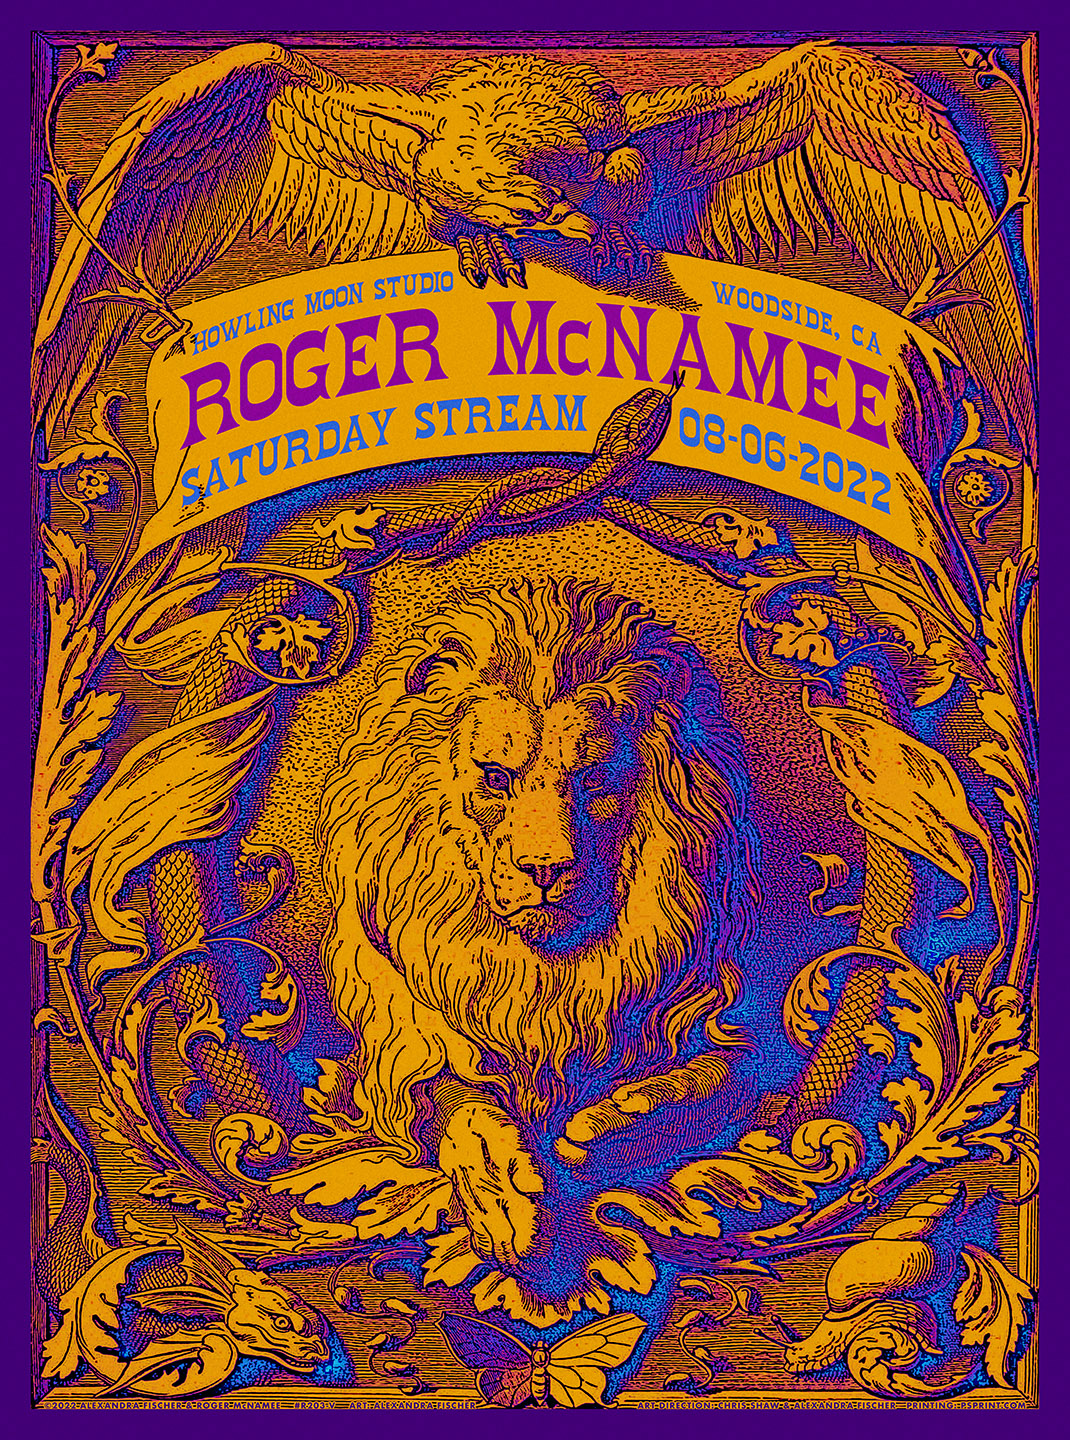 R203V › Roger McNamee 8/06/22 Saturday Stream, Howling Moon Studio, Woodside, California poster by Alexandra Fischer